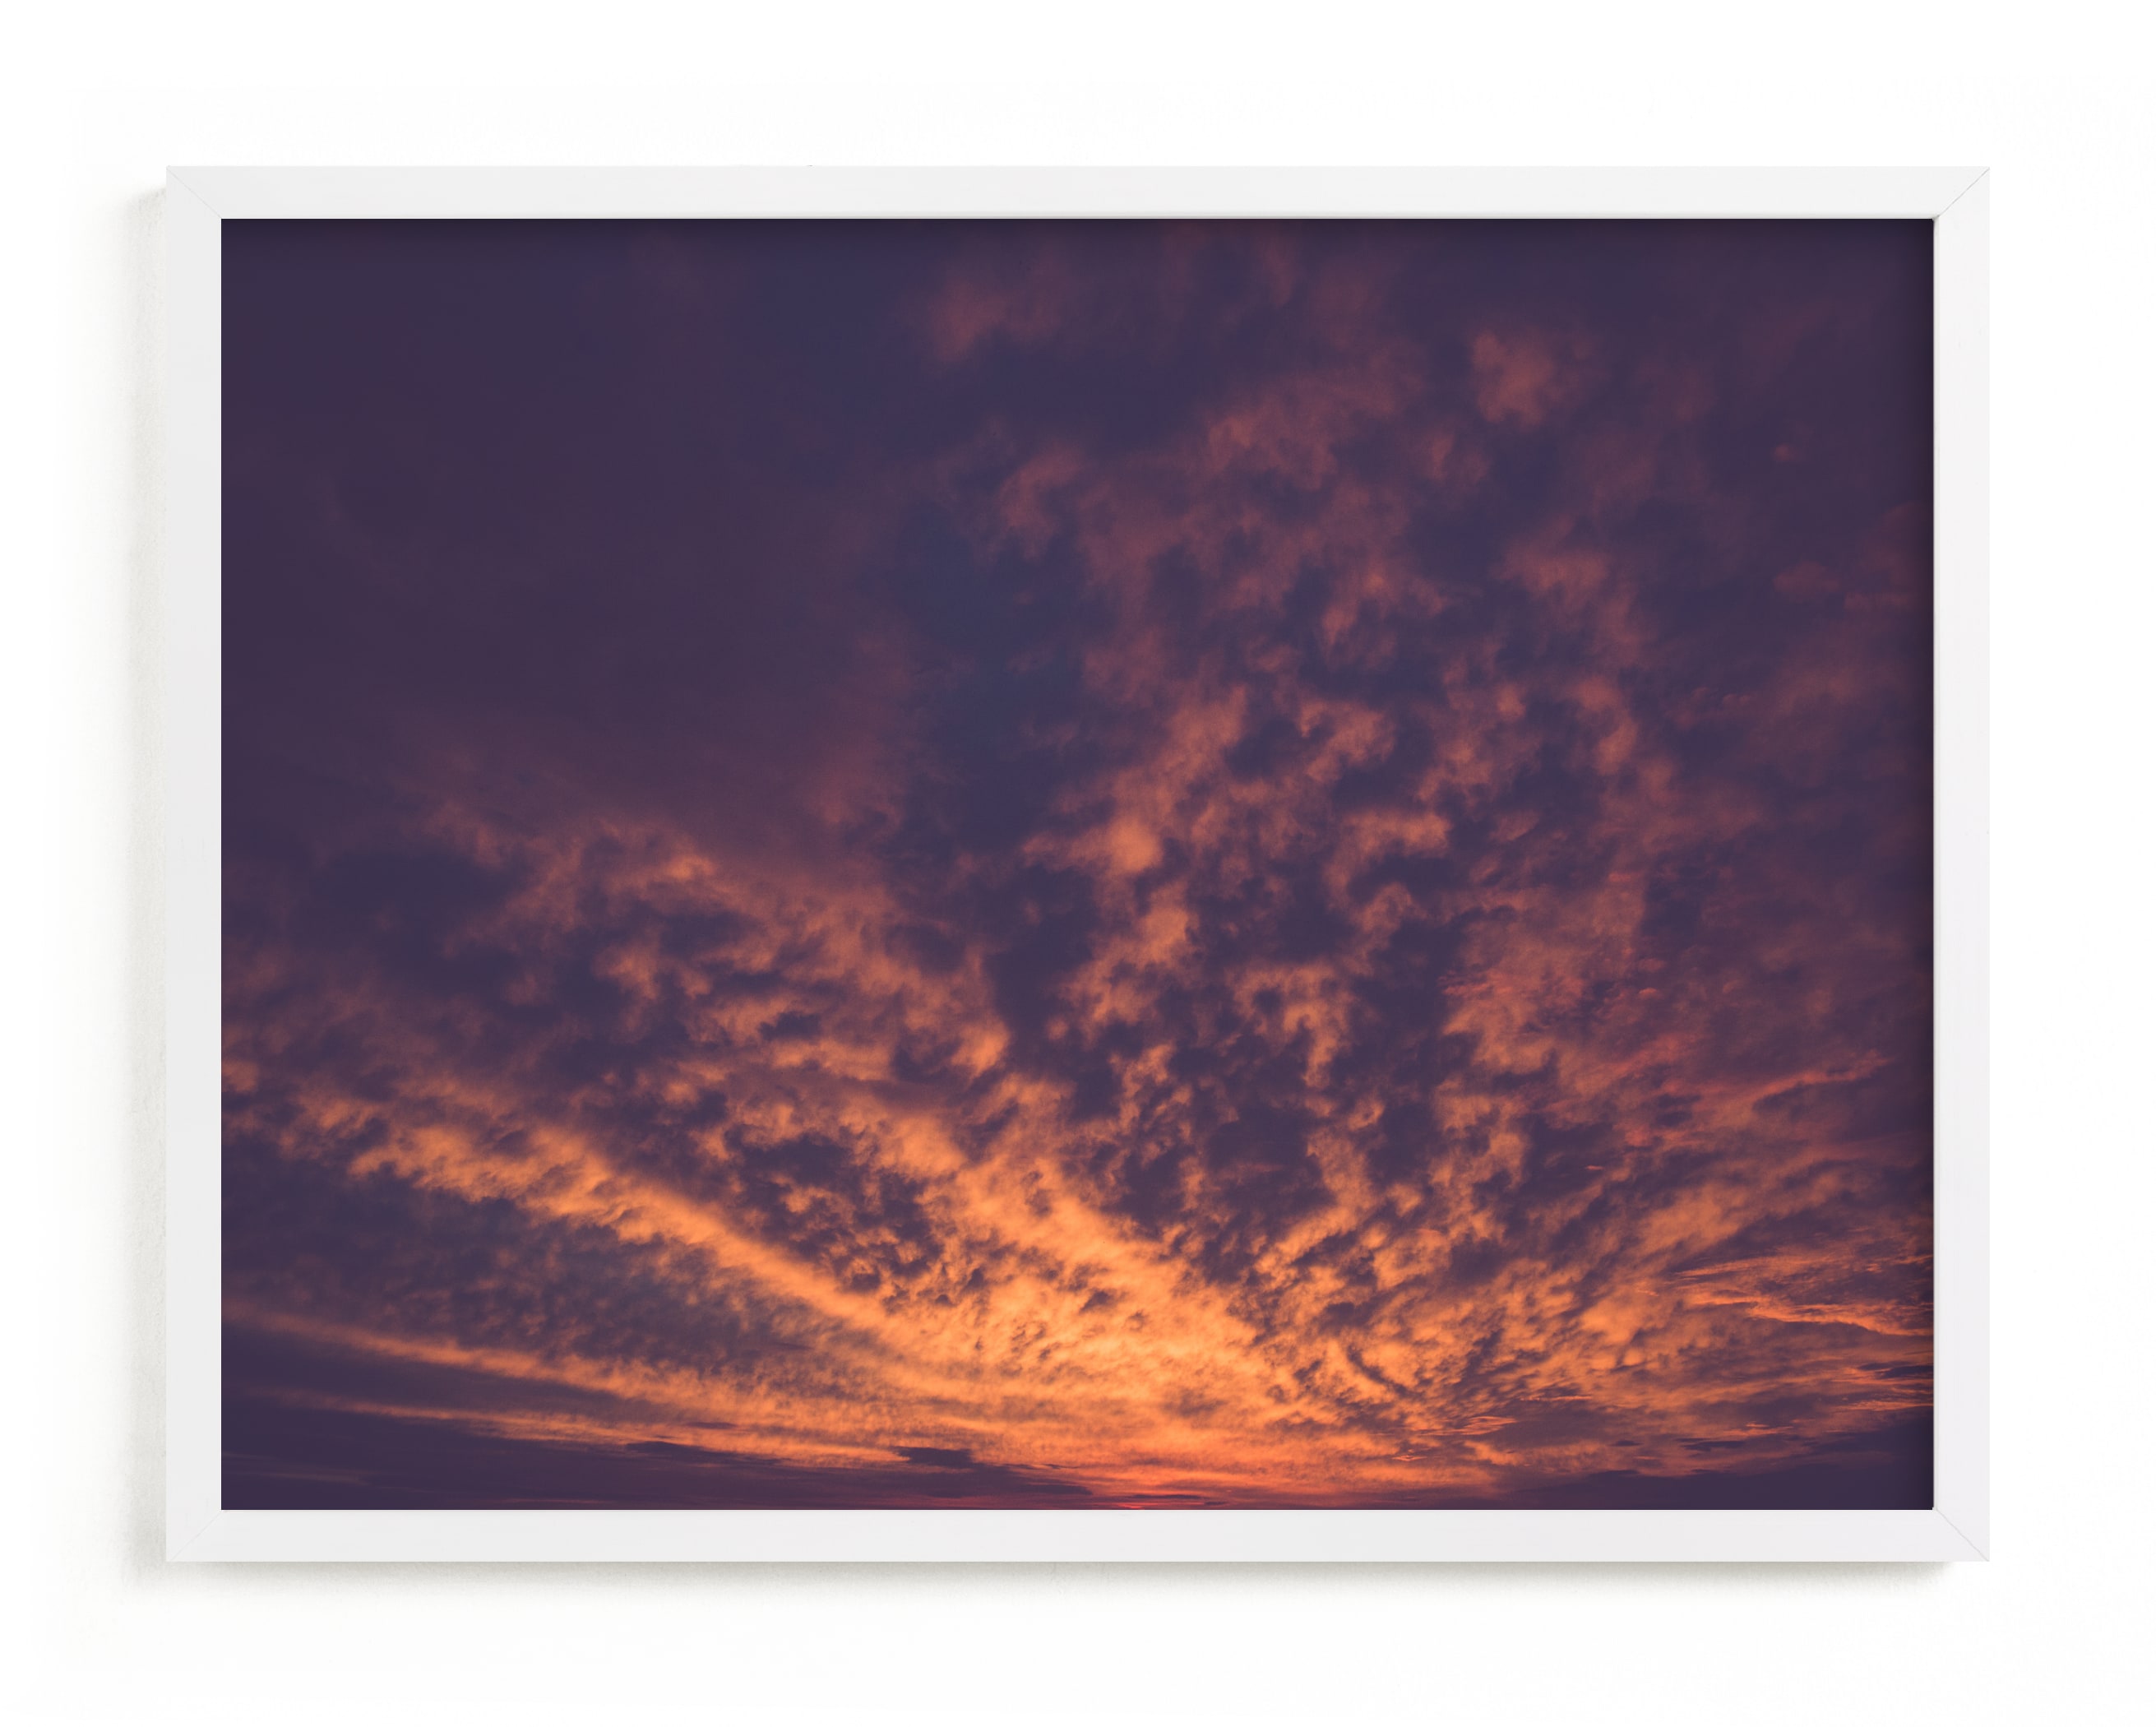 "Red sunset and lake" by Lying on the grass in beautiful frame options and a variety of sizes.